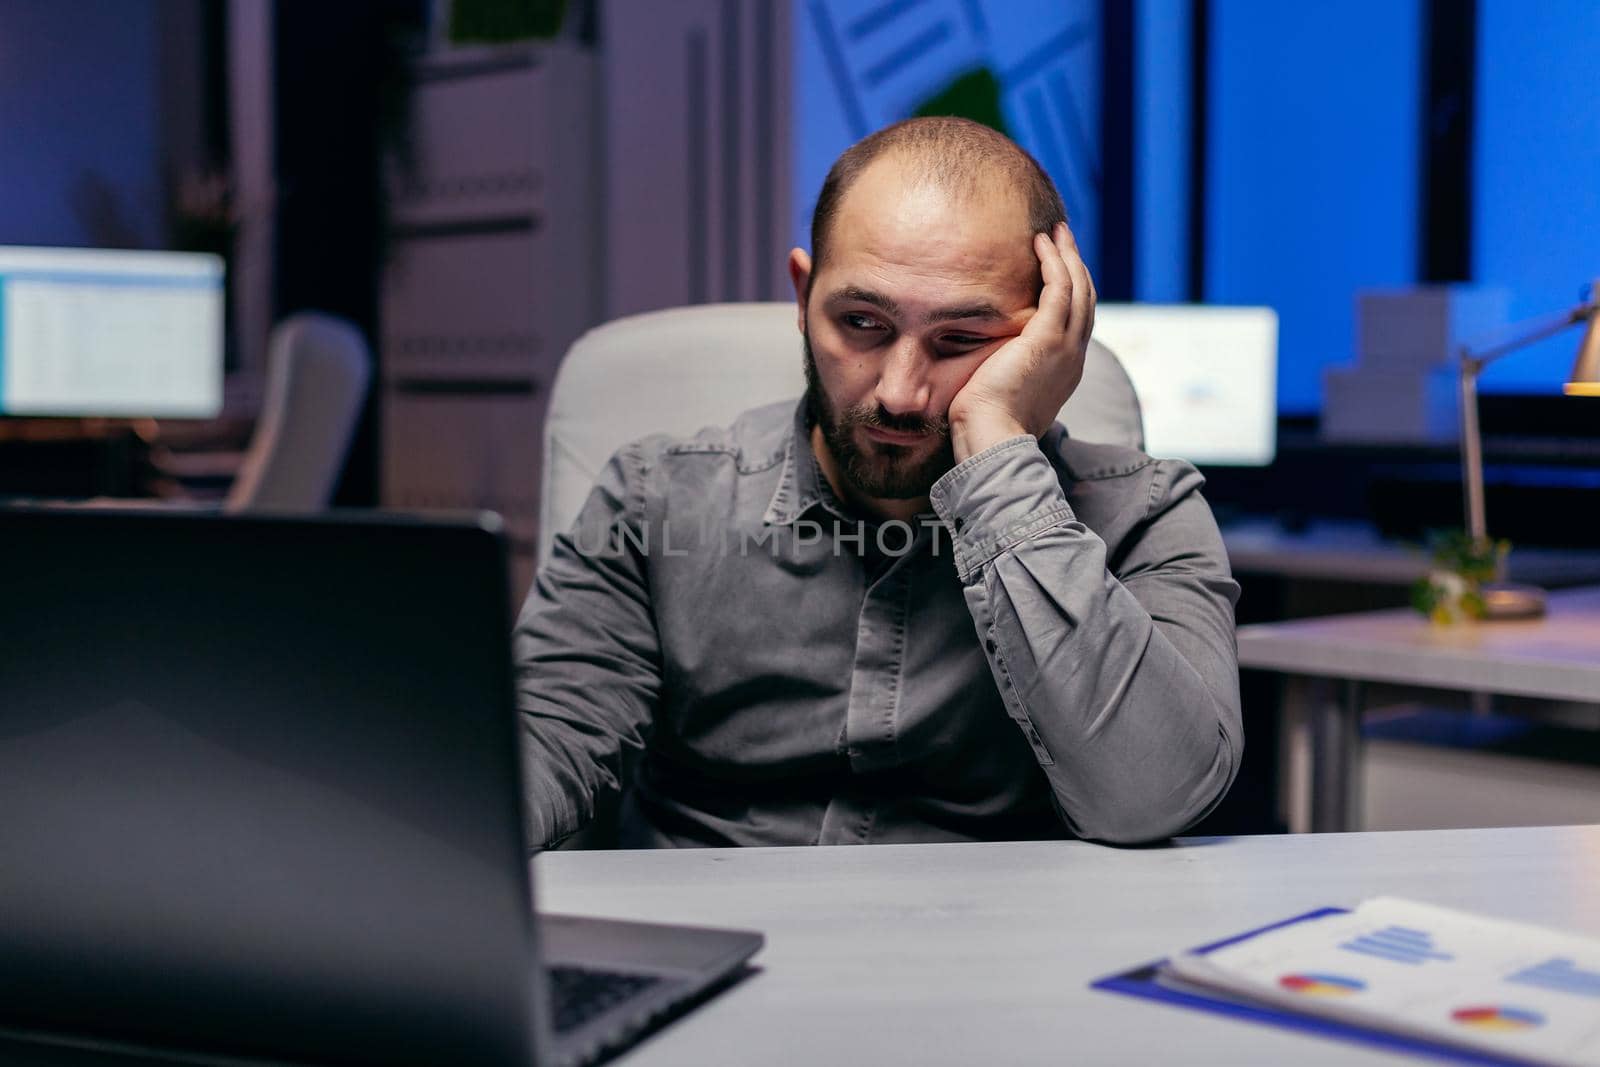 Tired businessman sit at the computerin the evening works on deadline. Workaholic employee falling asleep because of working late at night alone in the office for important company project.